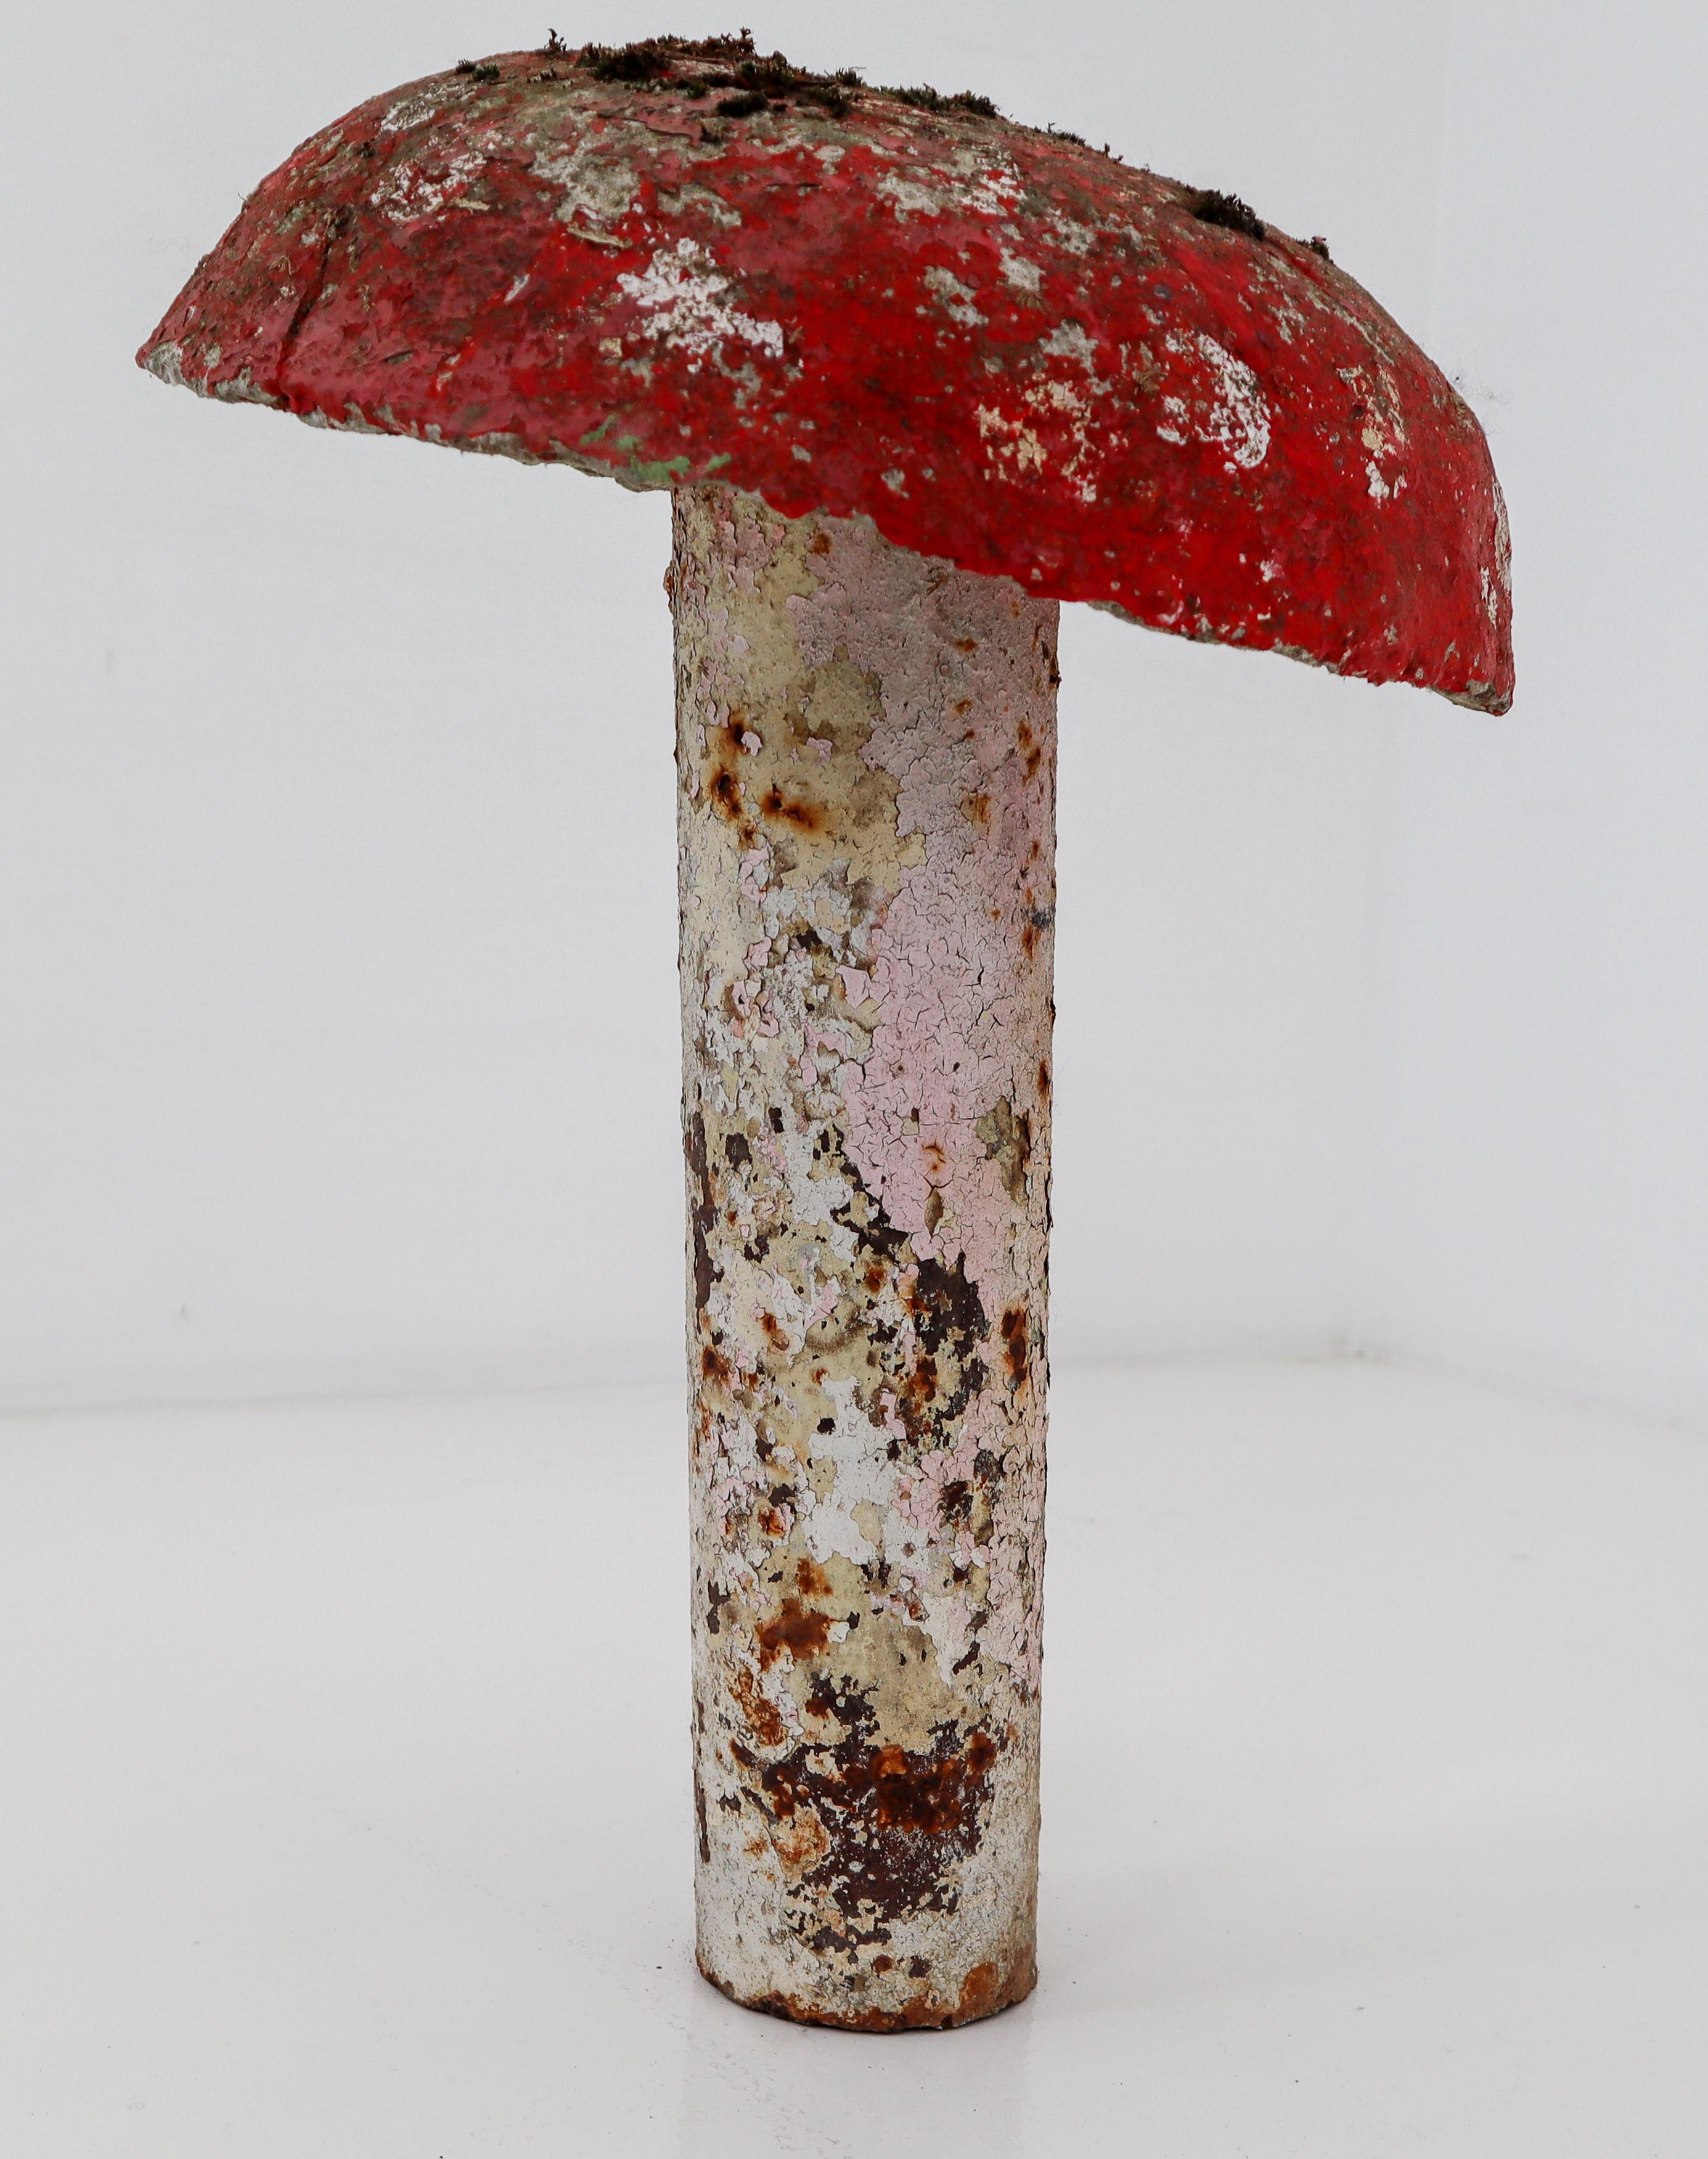 Found in France, this cement mushroom serves well as a whimsical garden element. Great color and patina.